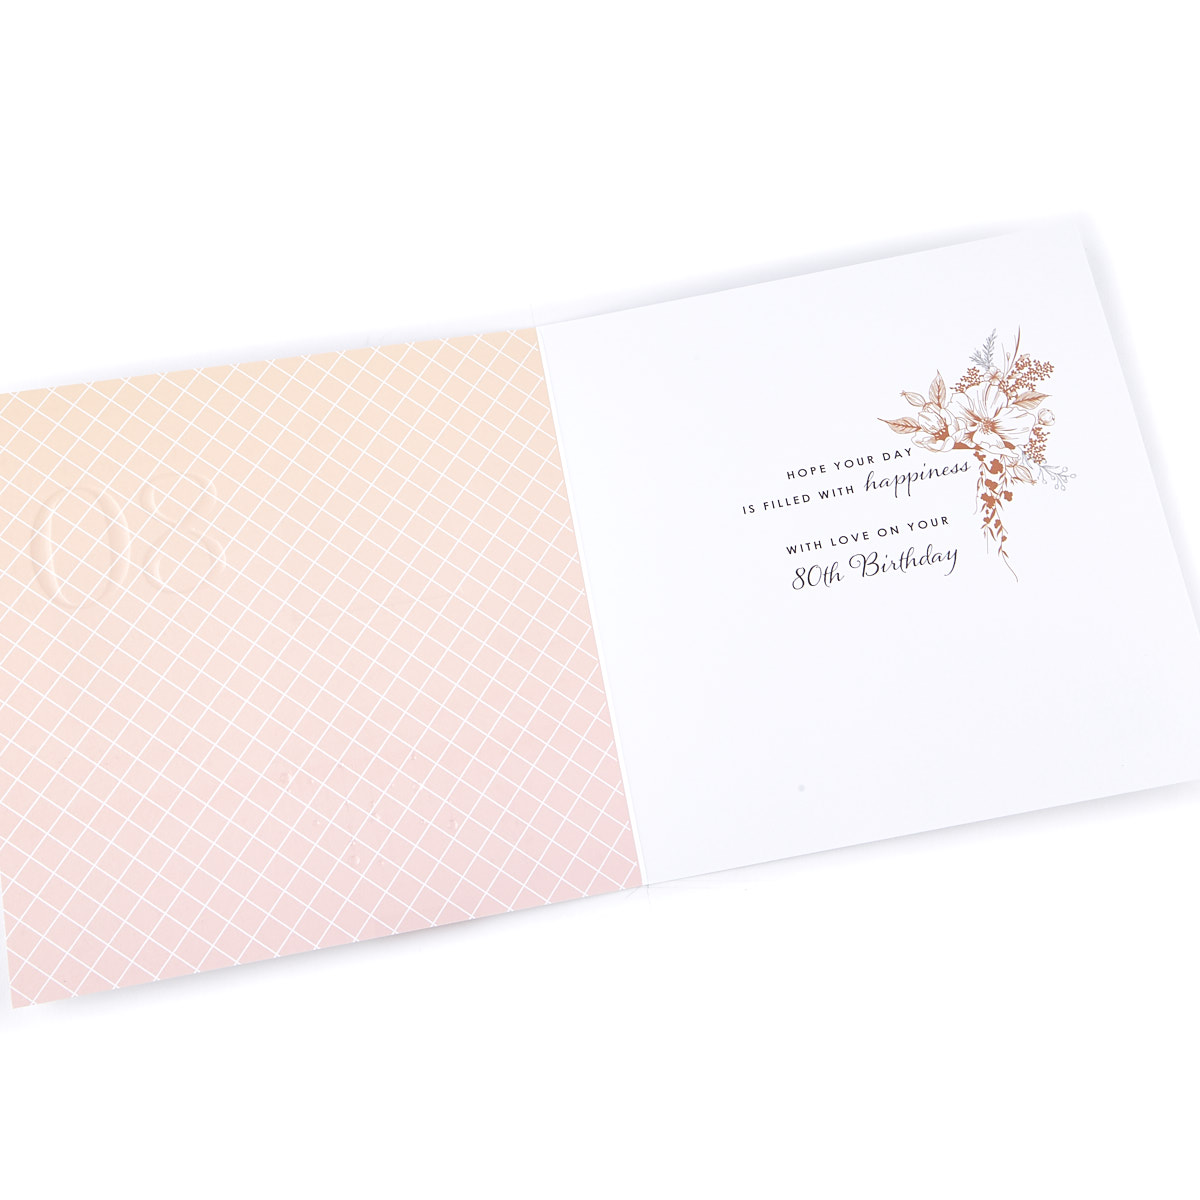 Platinum Collection 80th Birthday Card - Rose Gold Cake 